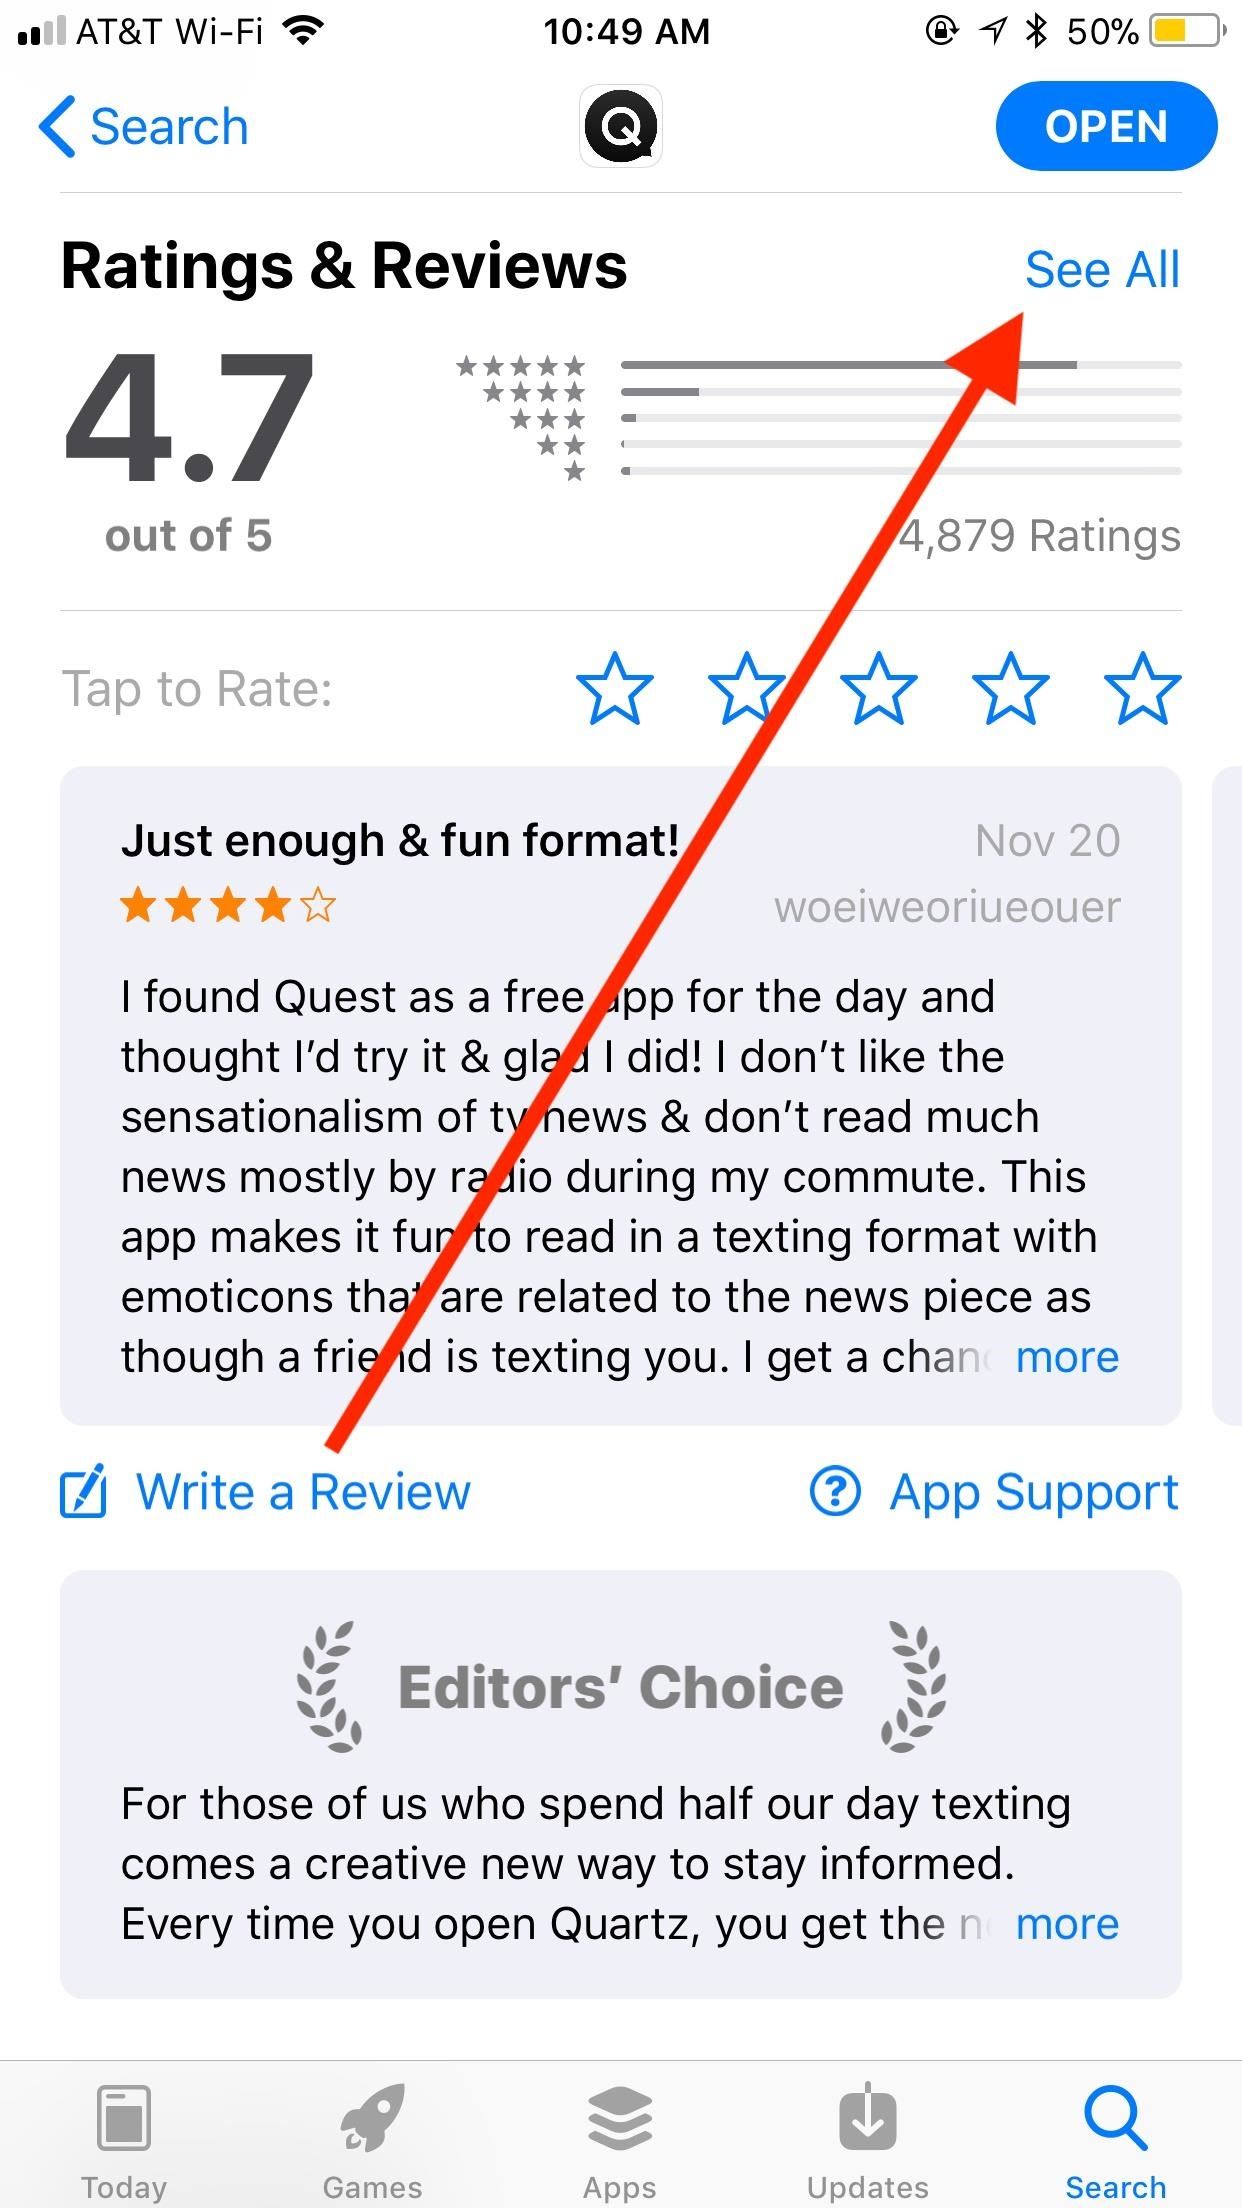 How to Sort App Store Reviews on Your iPhone in iOS 11.3